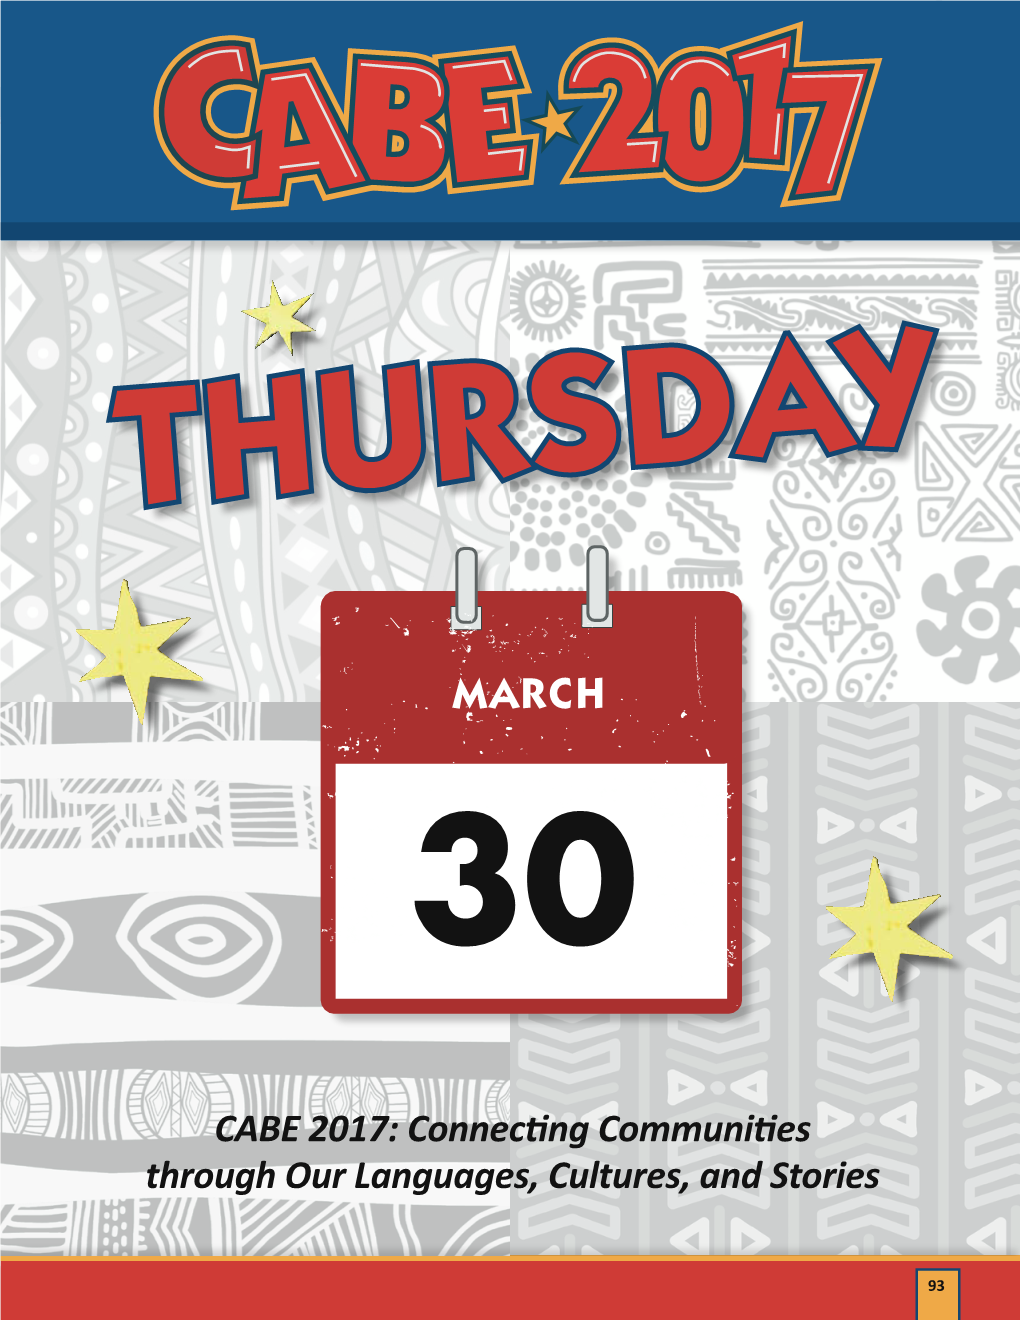 CABE 2017 Annual Conference